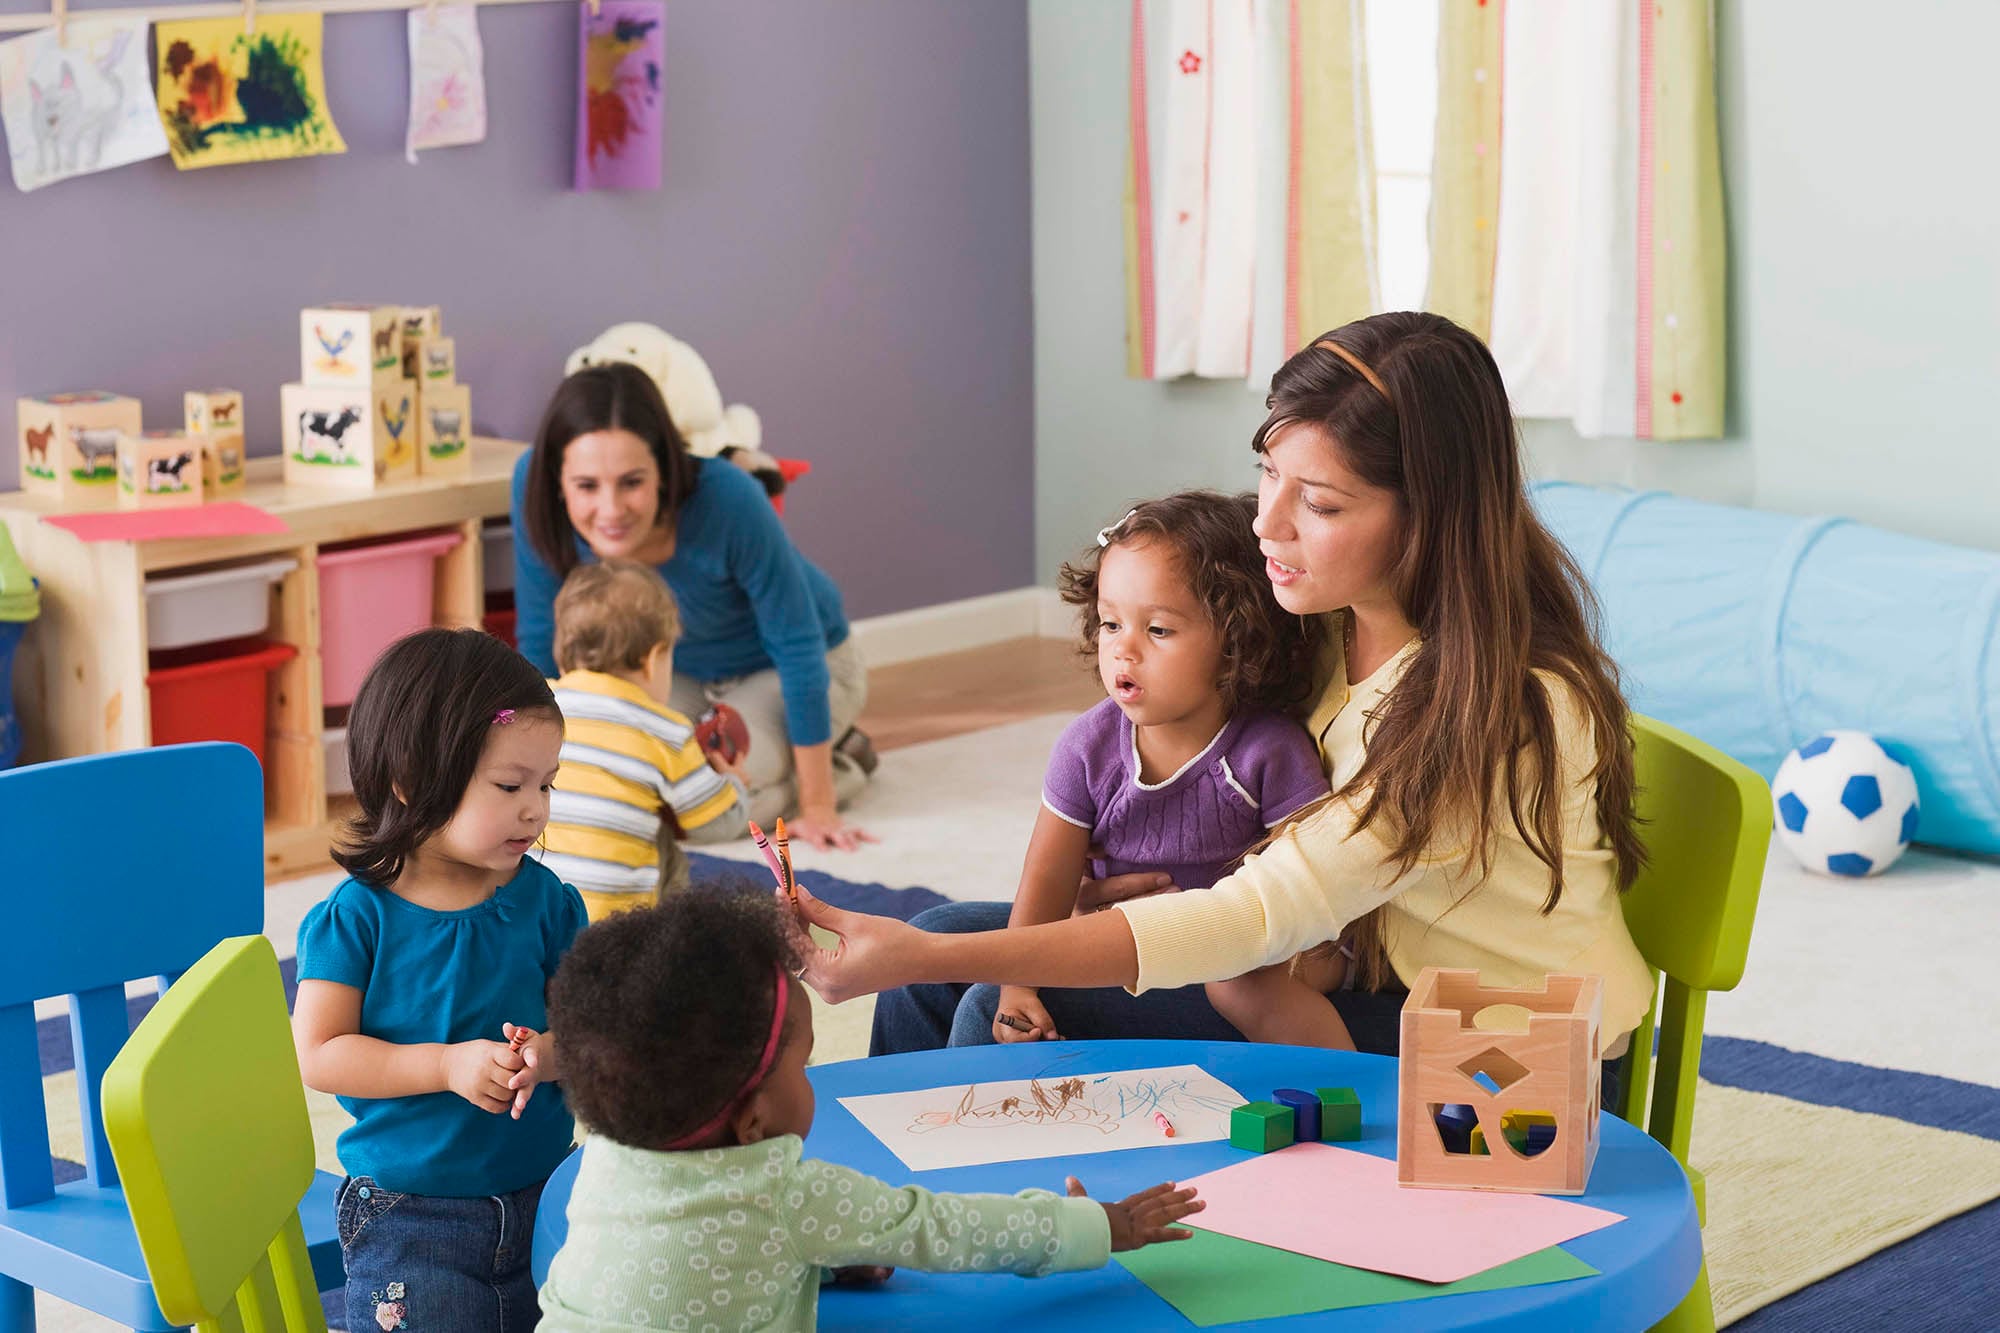 Two adults care for four children at a at-home childcare and early education center. There are toys and learning tools in the background with colorful walls.